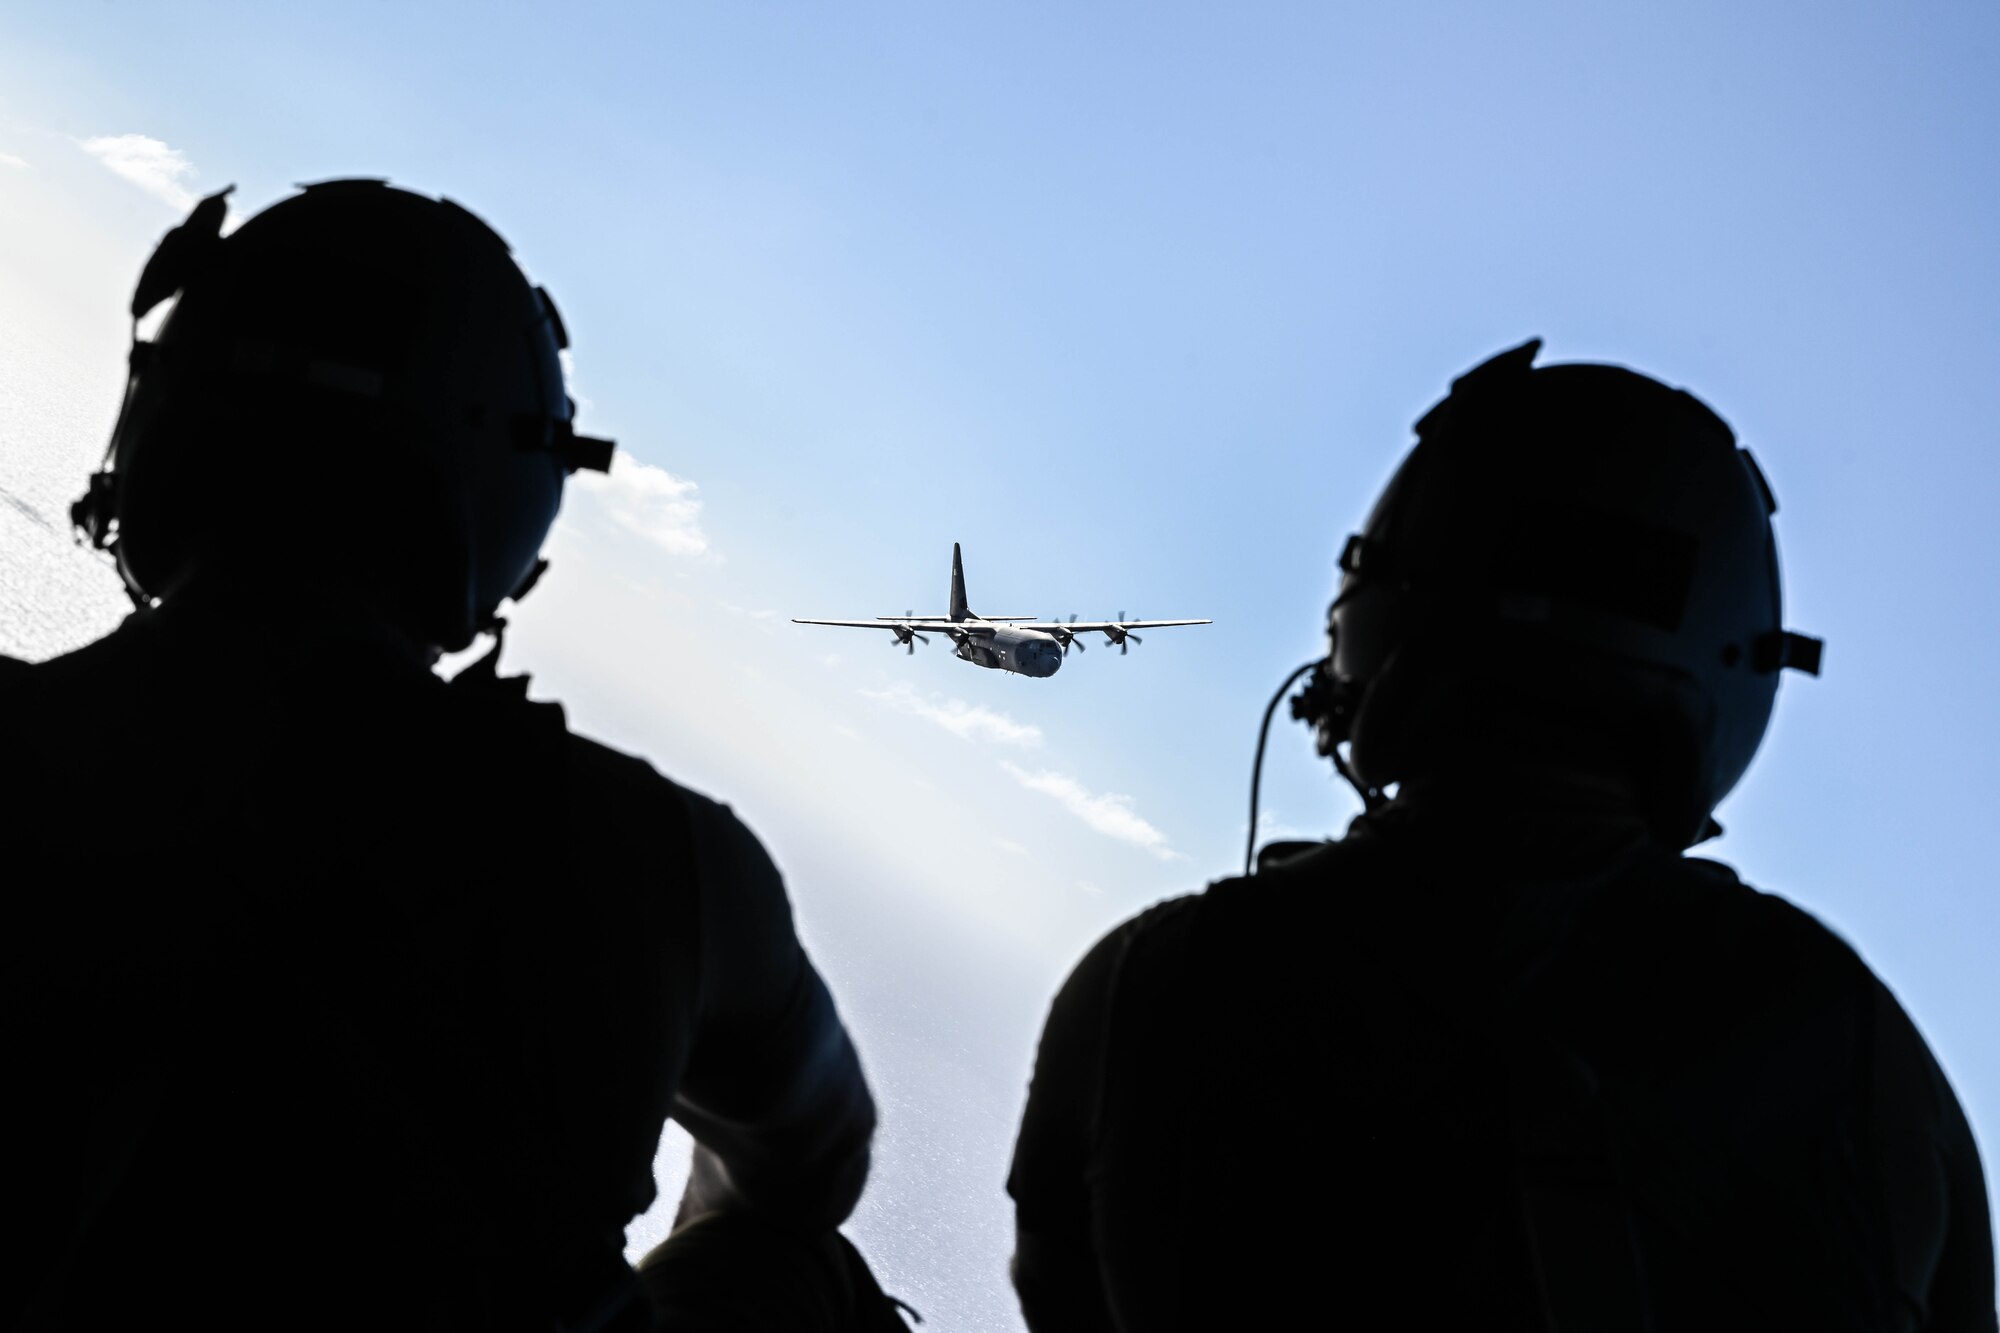 Two people wearing helmets watch a military aircraft